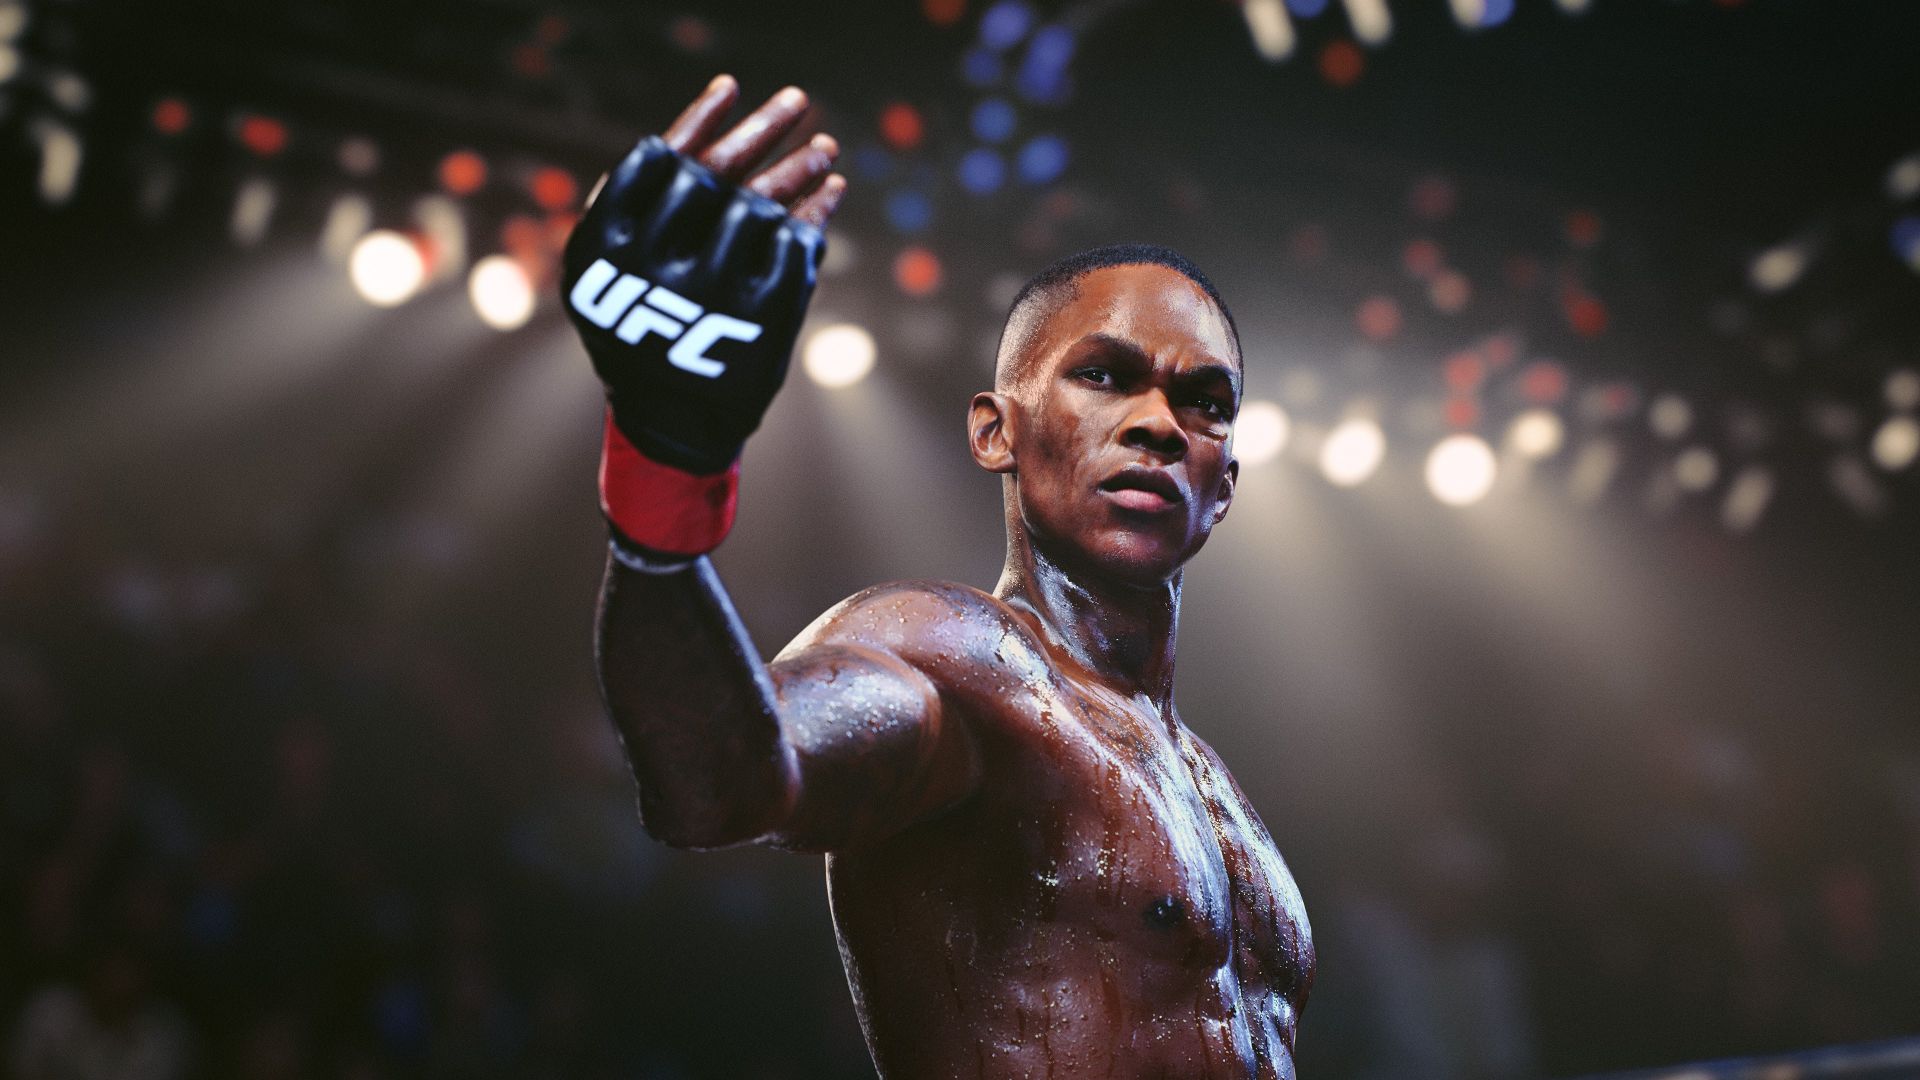 EA Sports UFC 5 Releases on October 27th for PS5 and Xbox Series X/S